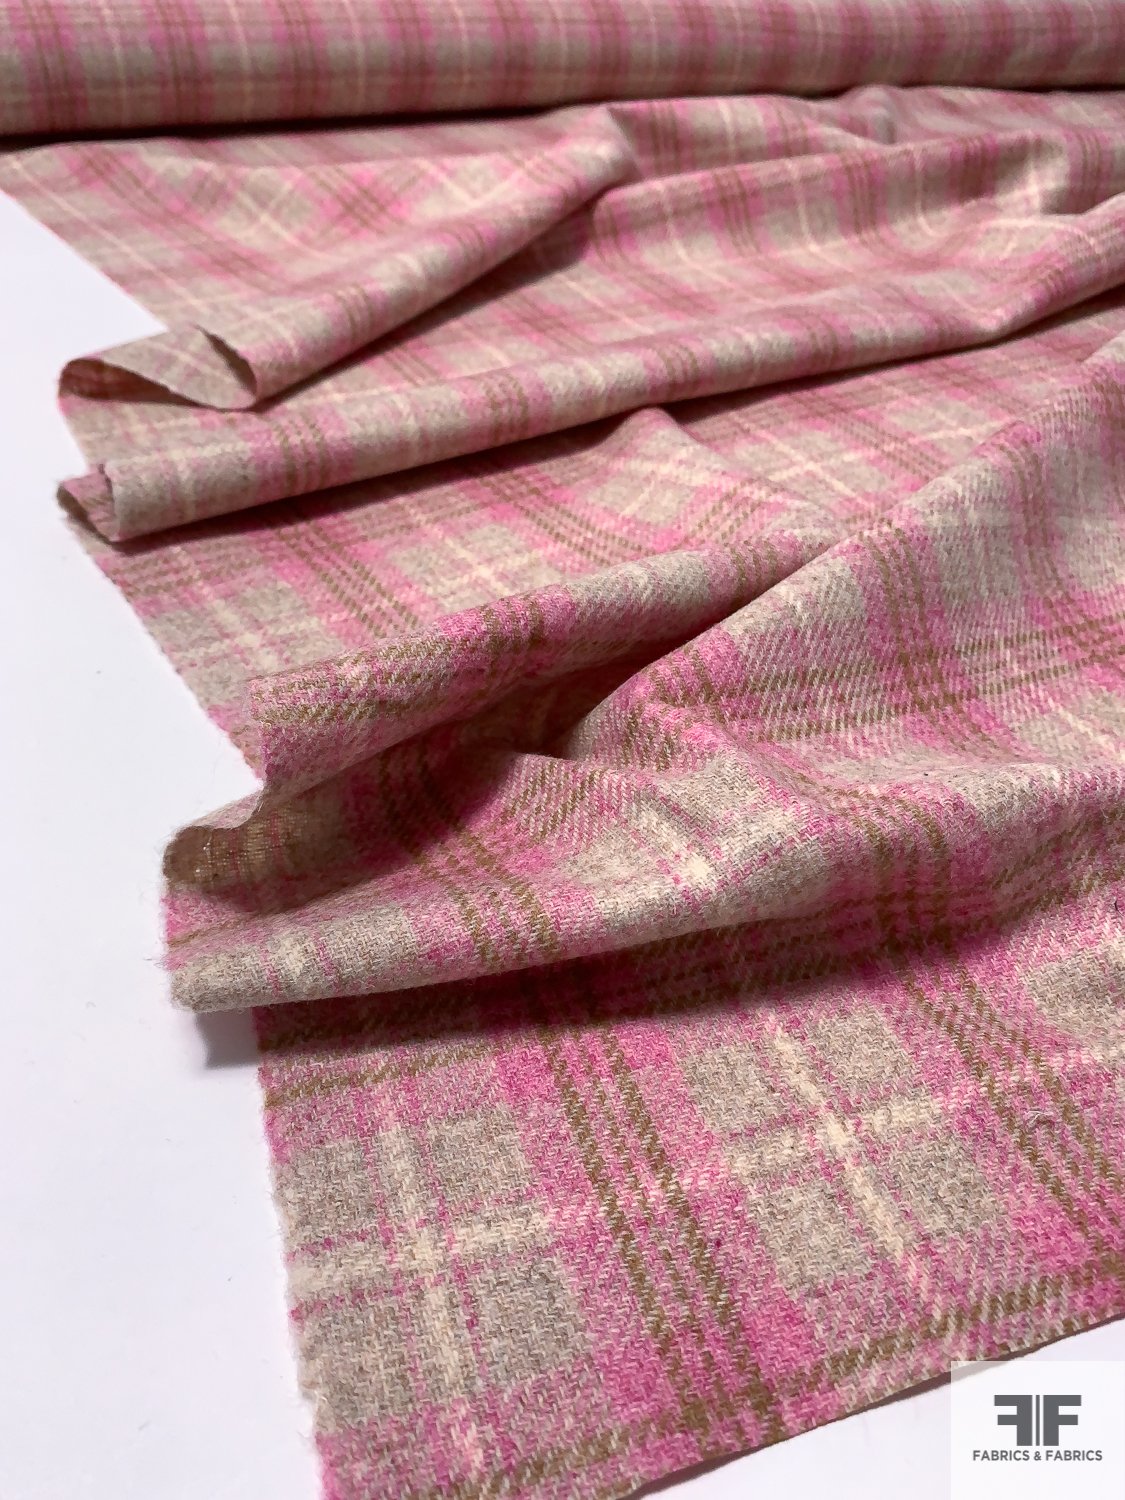 Classic Plaid Jacket Weight Wool Suiting - Pink / Oatmeal / Olive Green